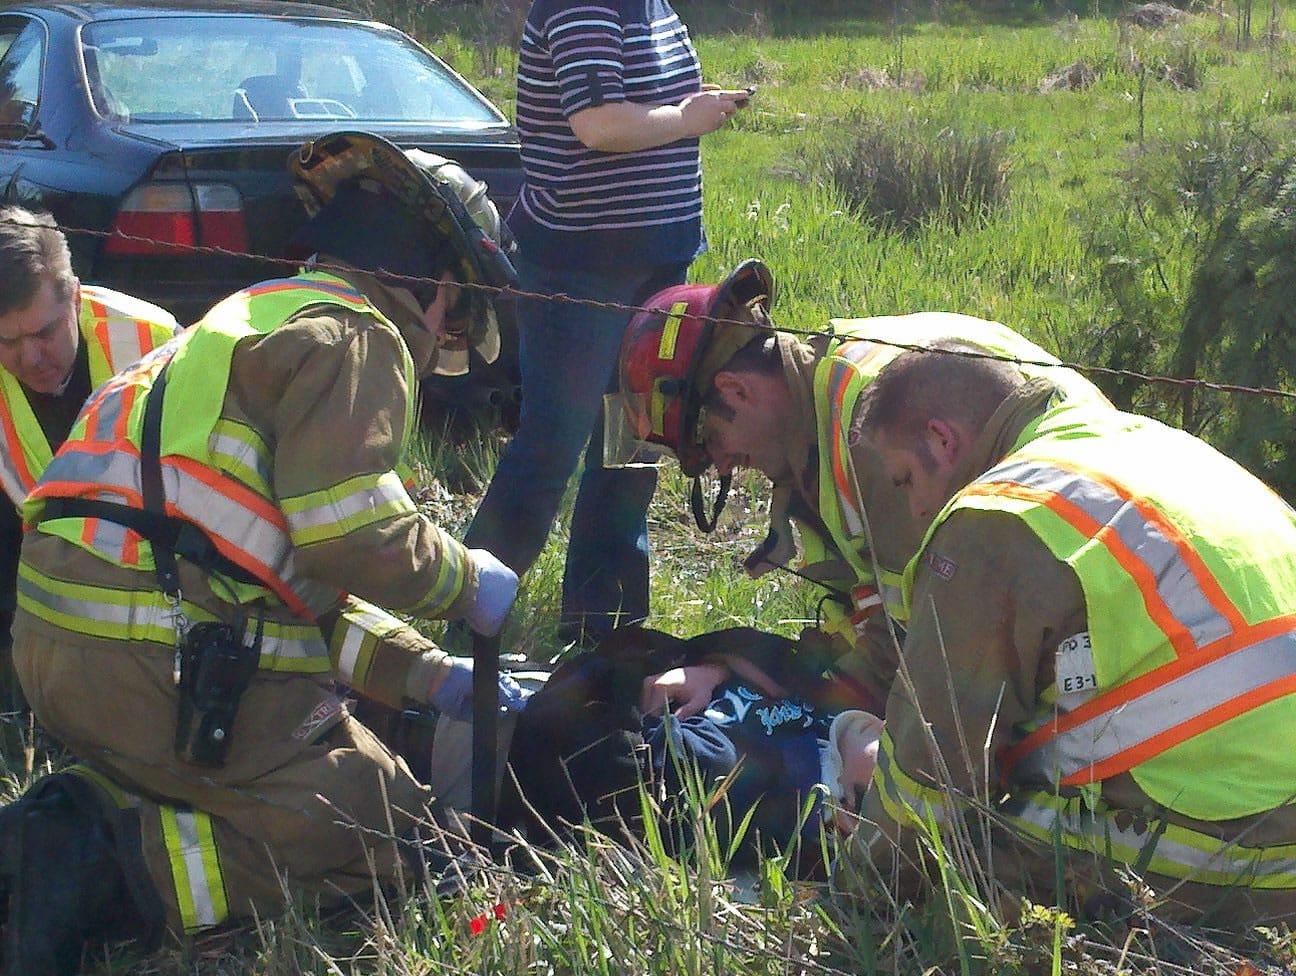 Paramedics work to stabilize a patient injured in a Thursday afternoon auto accident near Hockinson High School.